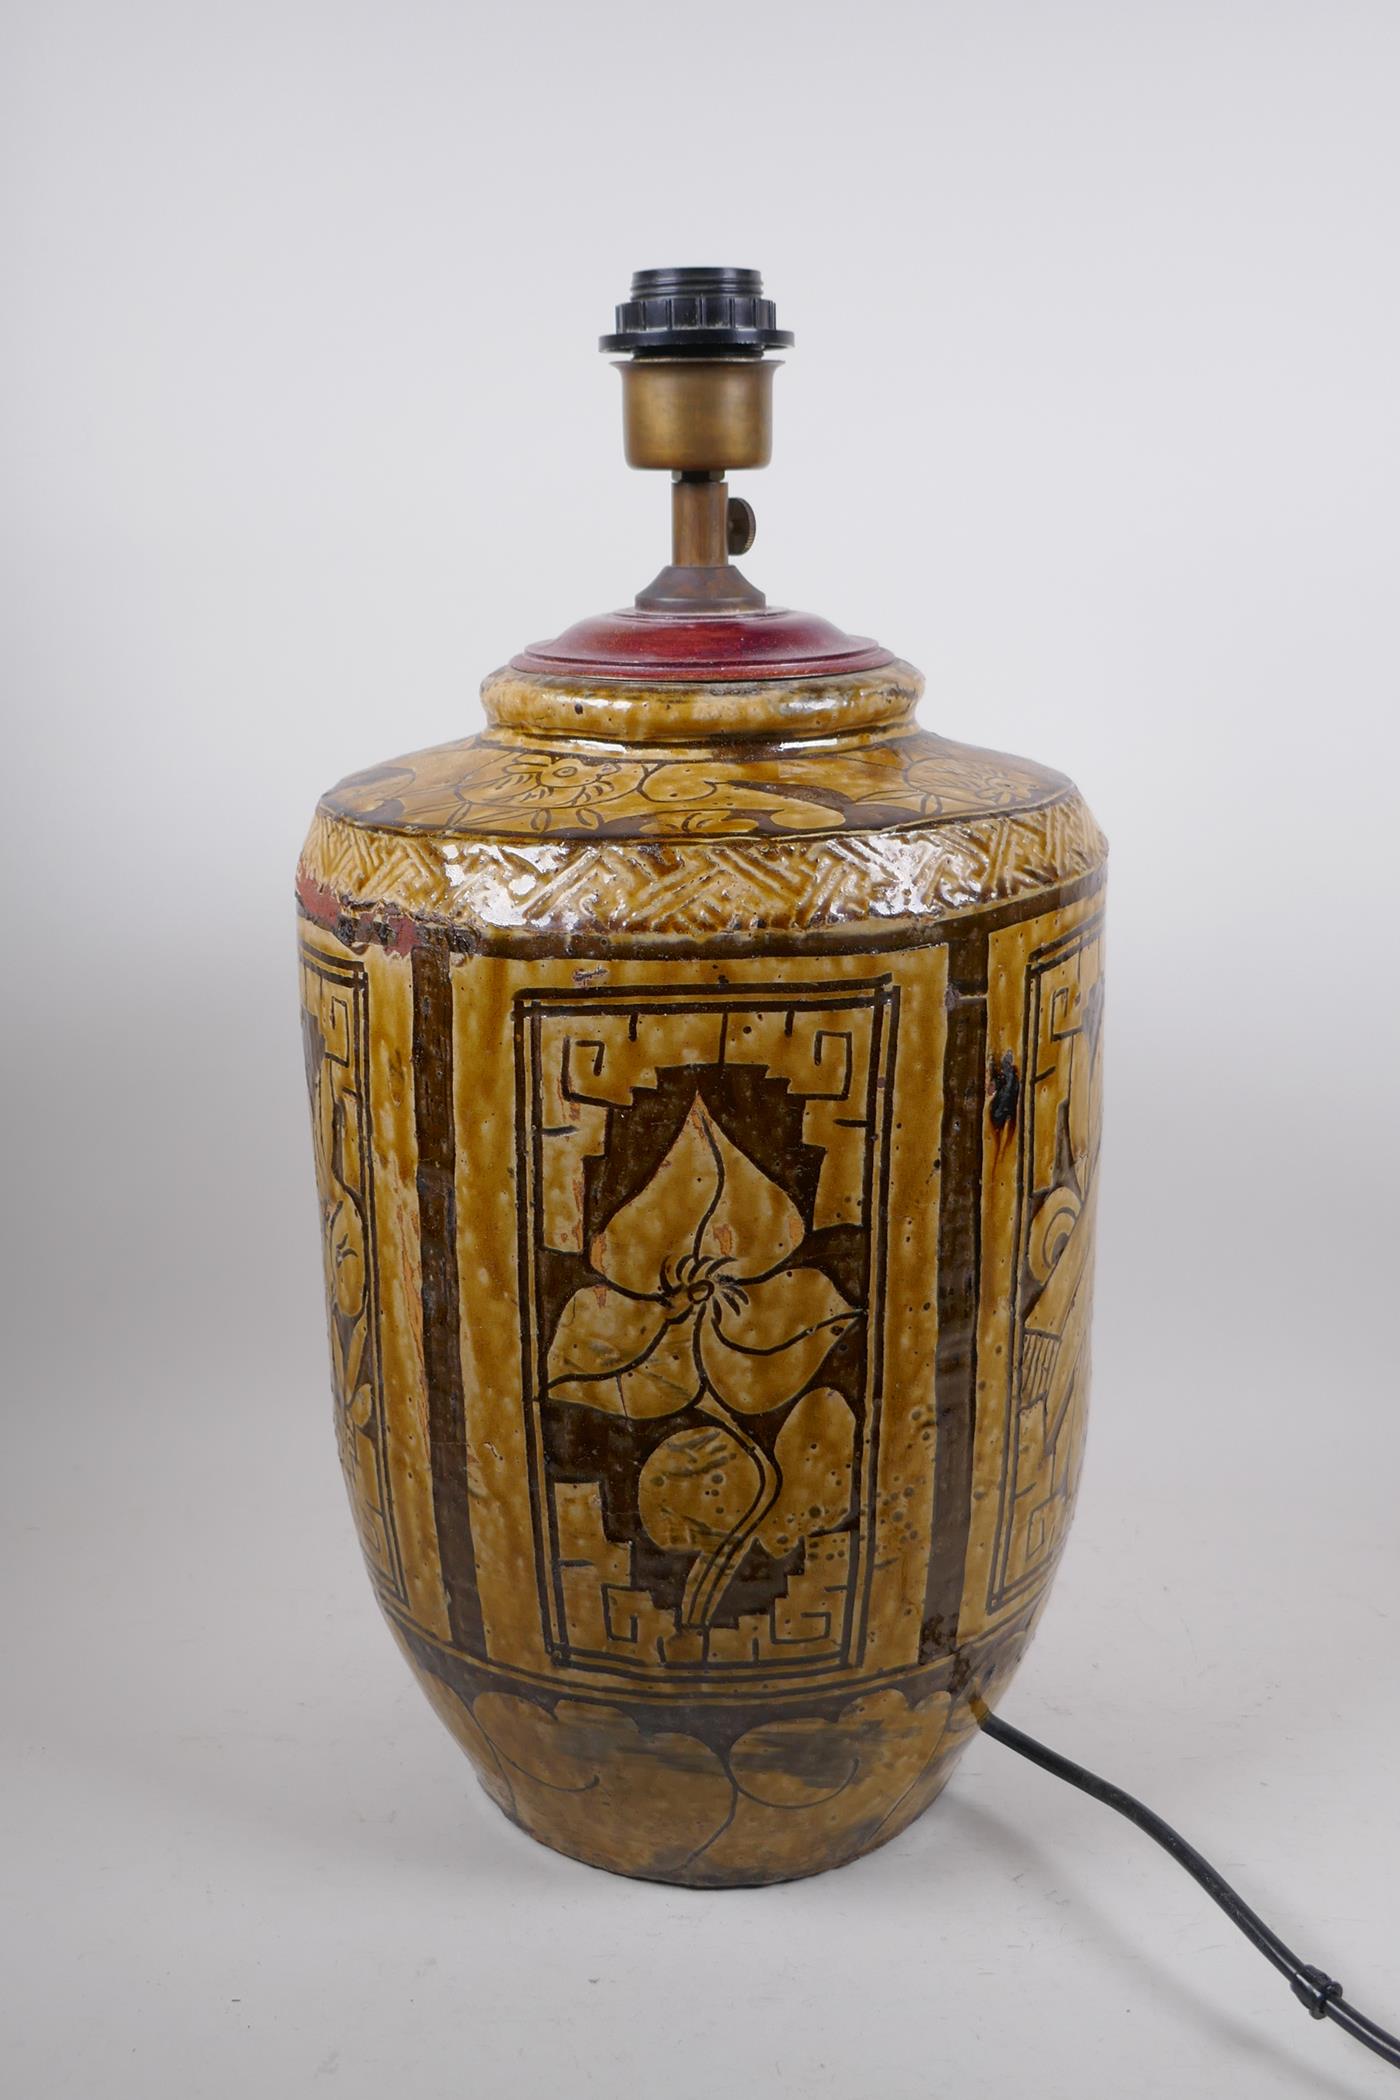 A C19th Chinese Cizhou kiln pottery jar, with decorative floral panels and bats, converted to a